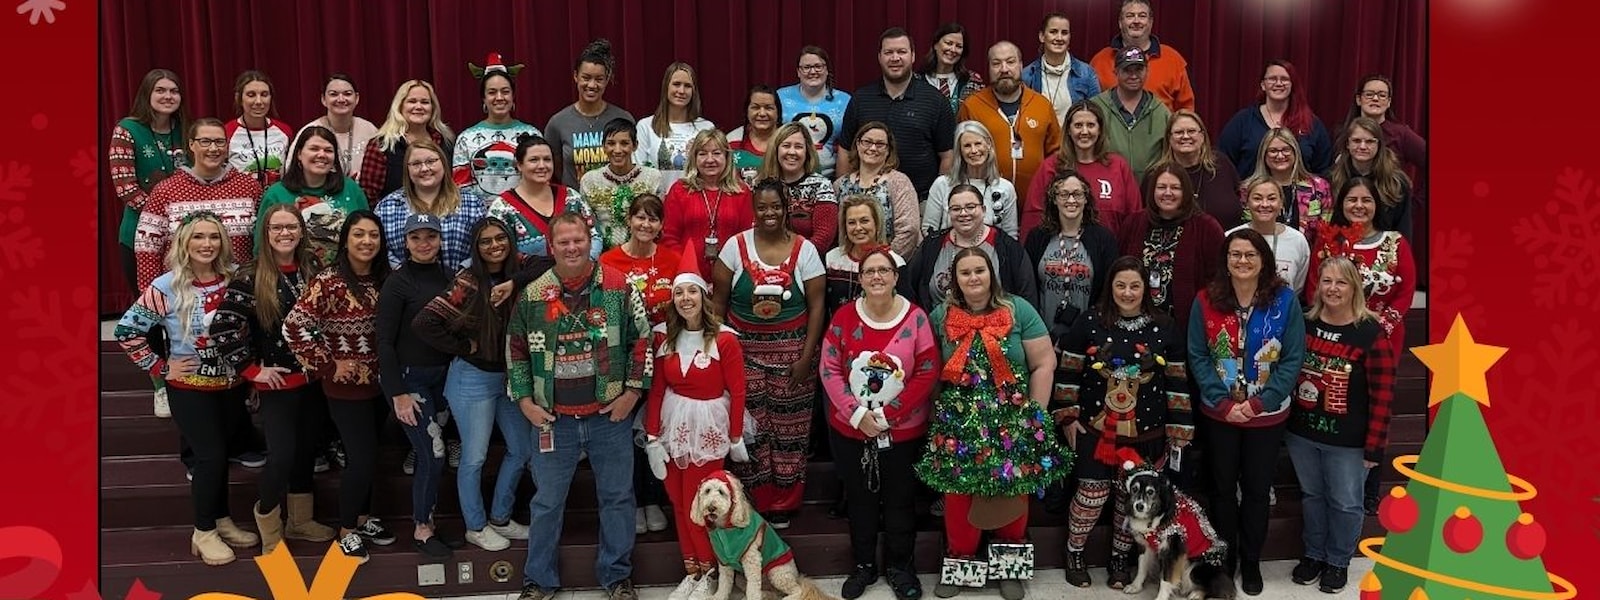 Staff picture with everyone in holiday wear